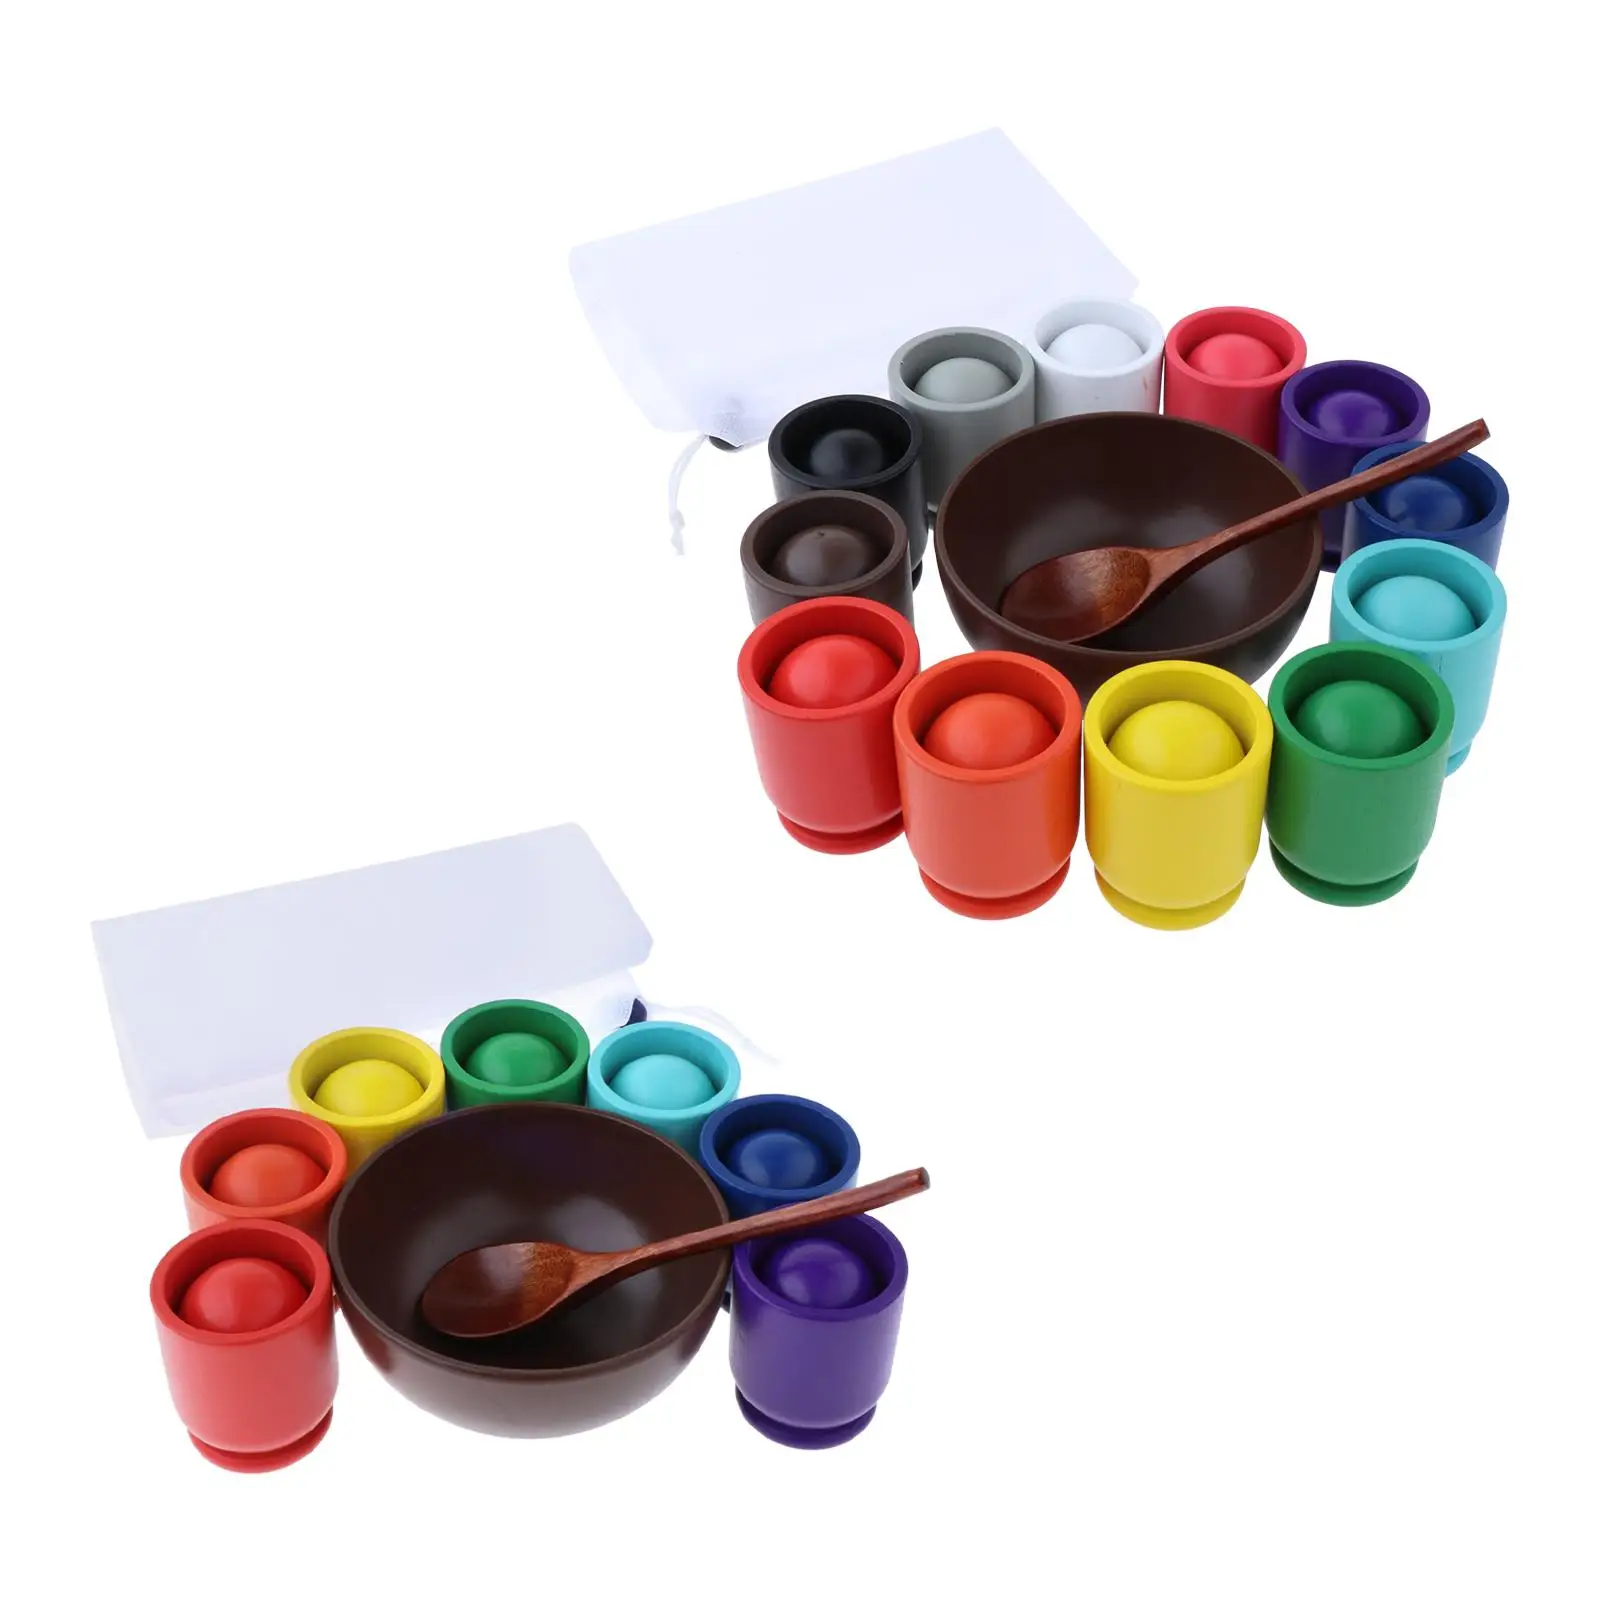 Children Rainbow Balls in Cups Montessori Board Game Color Sorting and Counting Baby Early Education Toys for Boys Girls